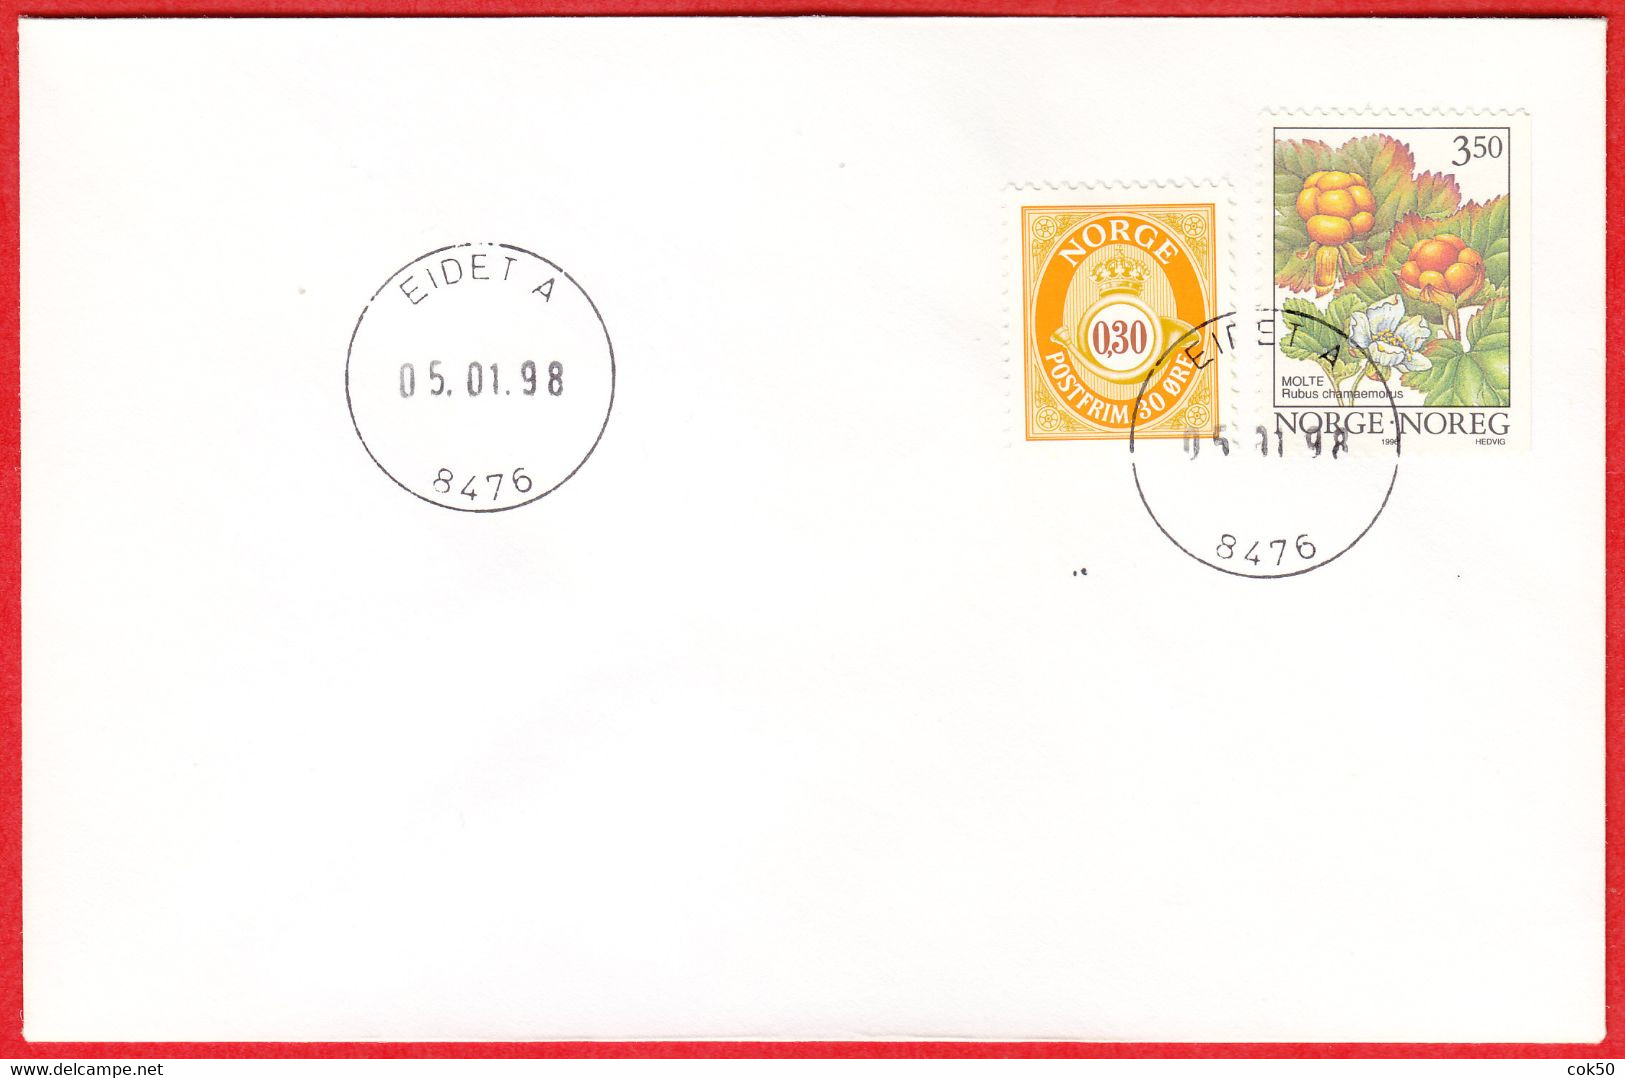 NORWAY -  8476 EIDET A (Nordland County) - Last Day/postoffice Closed On 1998.01.05 - Emisiones Locales